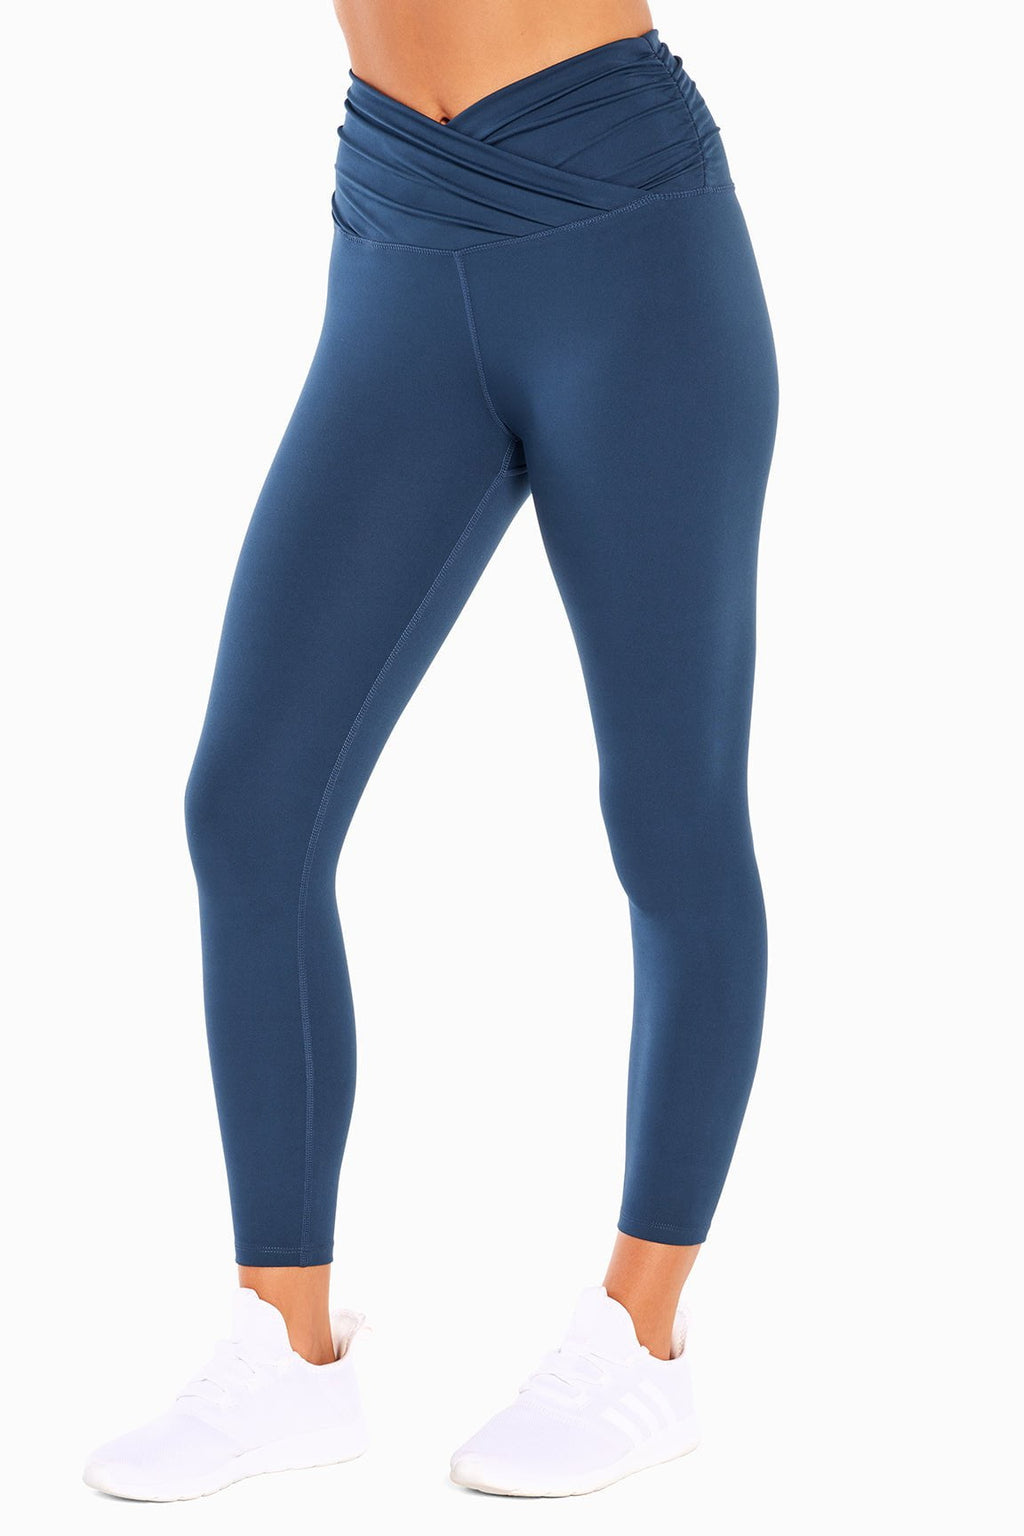 Zobha Shop Holiday Deals on Womens Pants